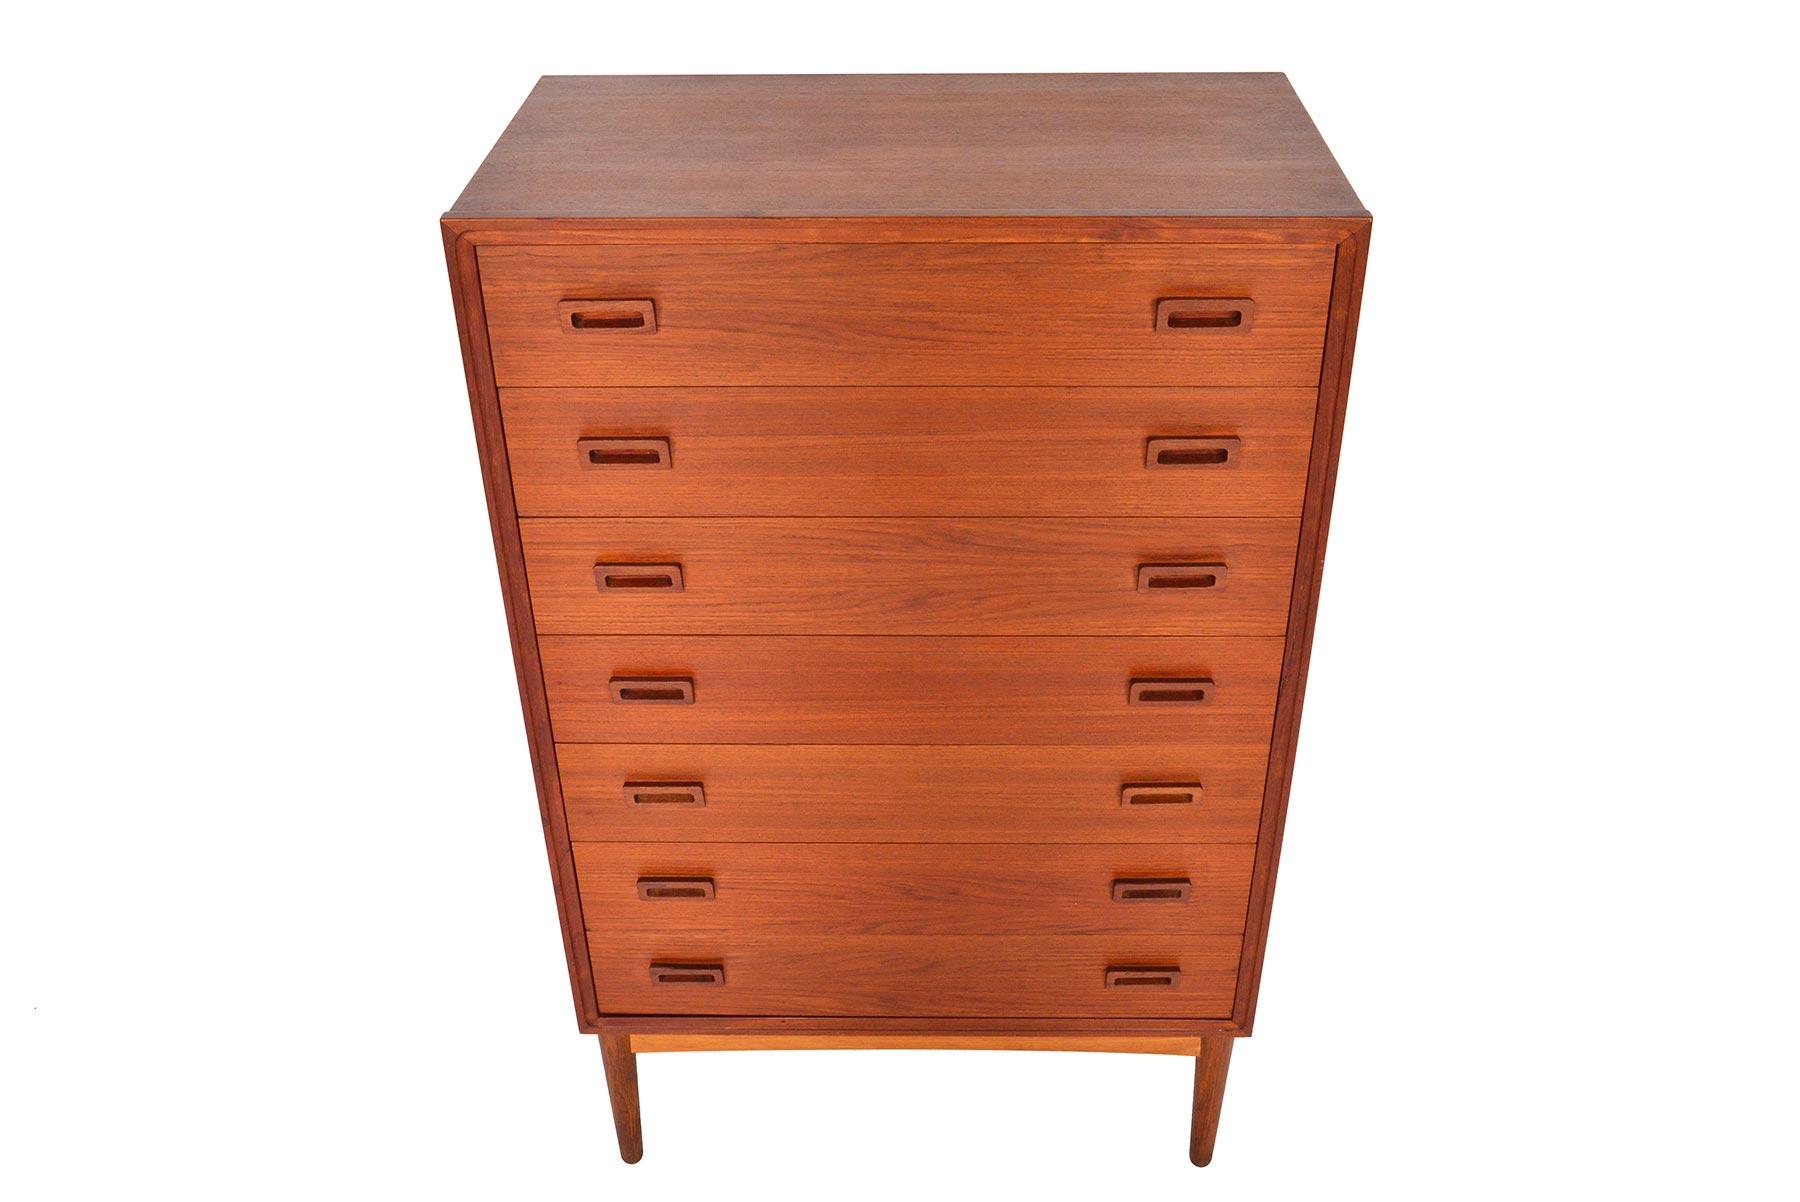 This wonderful Danish modern teak seven drawer highboy dresser is framed in sculpted afrormosia. Drawers are adorned with a pair of trapezoidal pulls. In excellent original condition.

